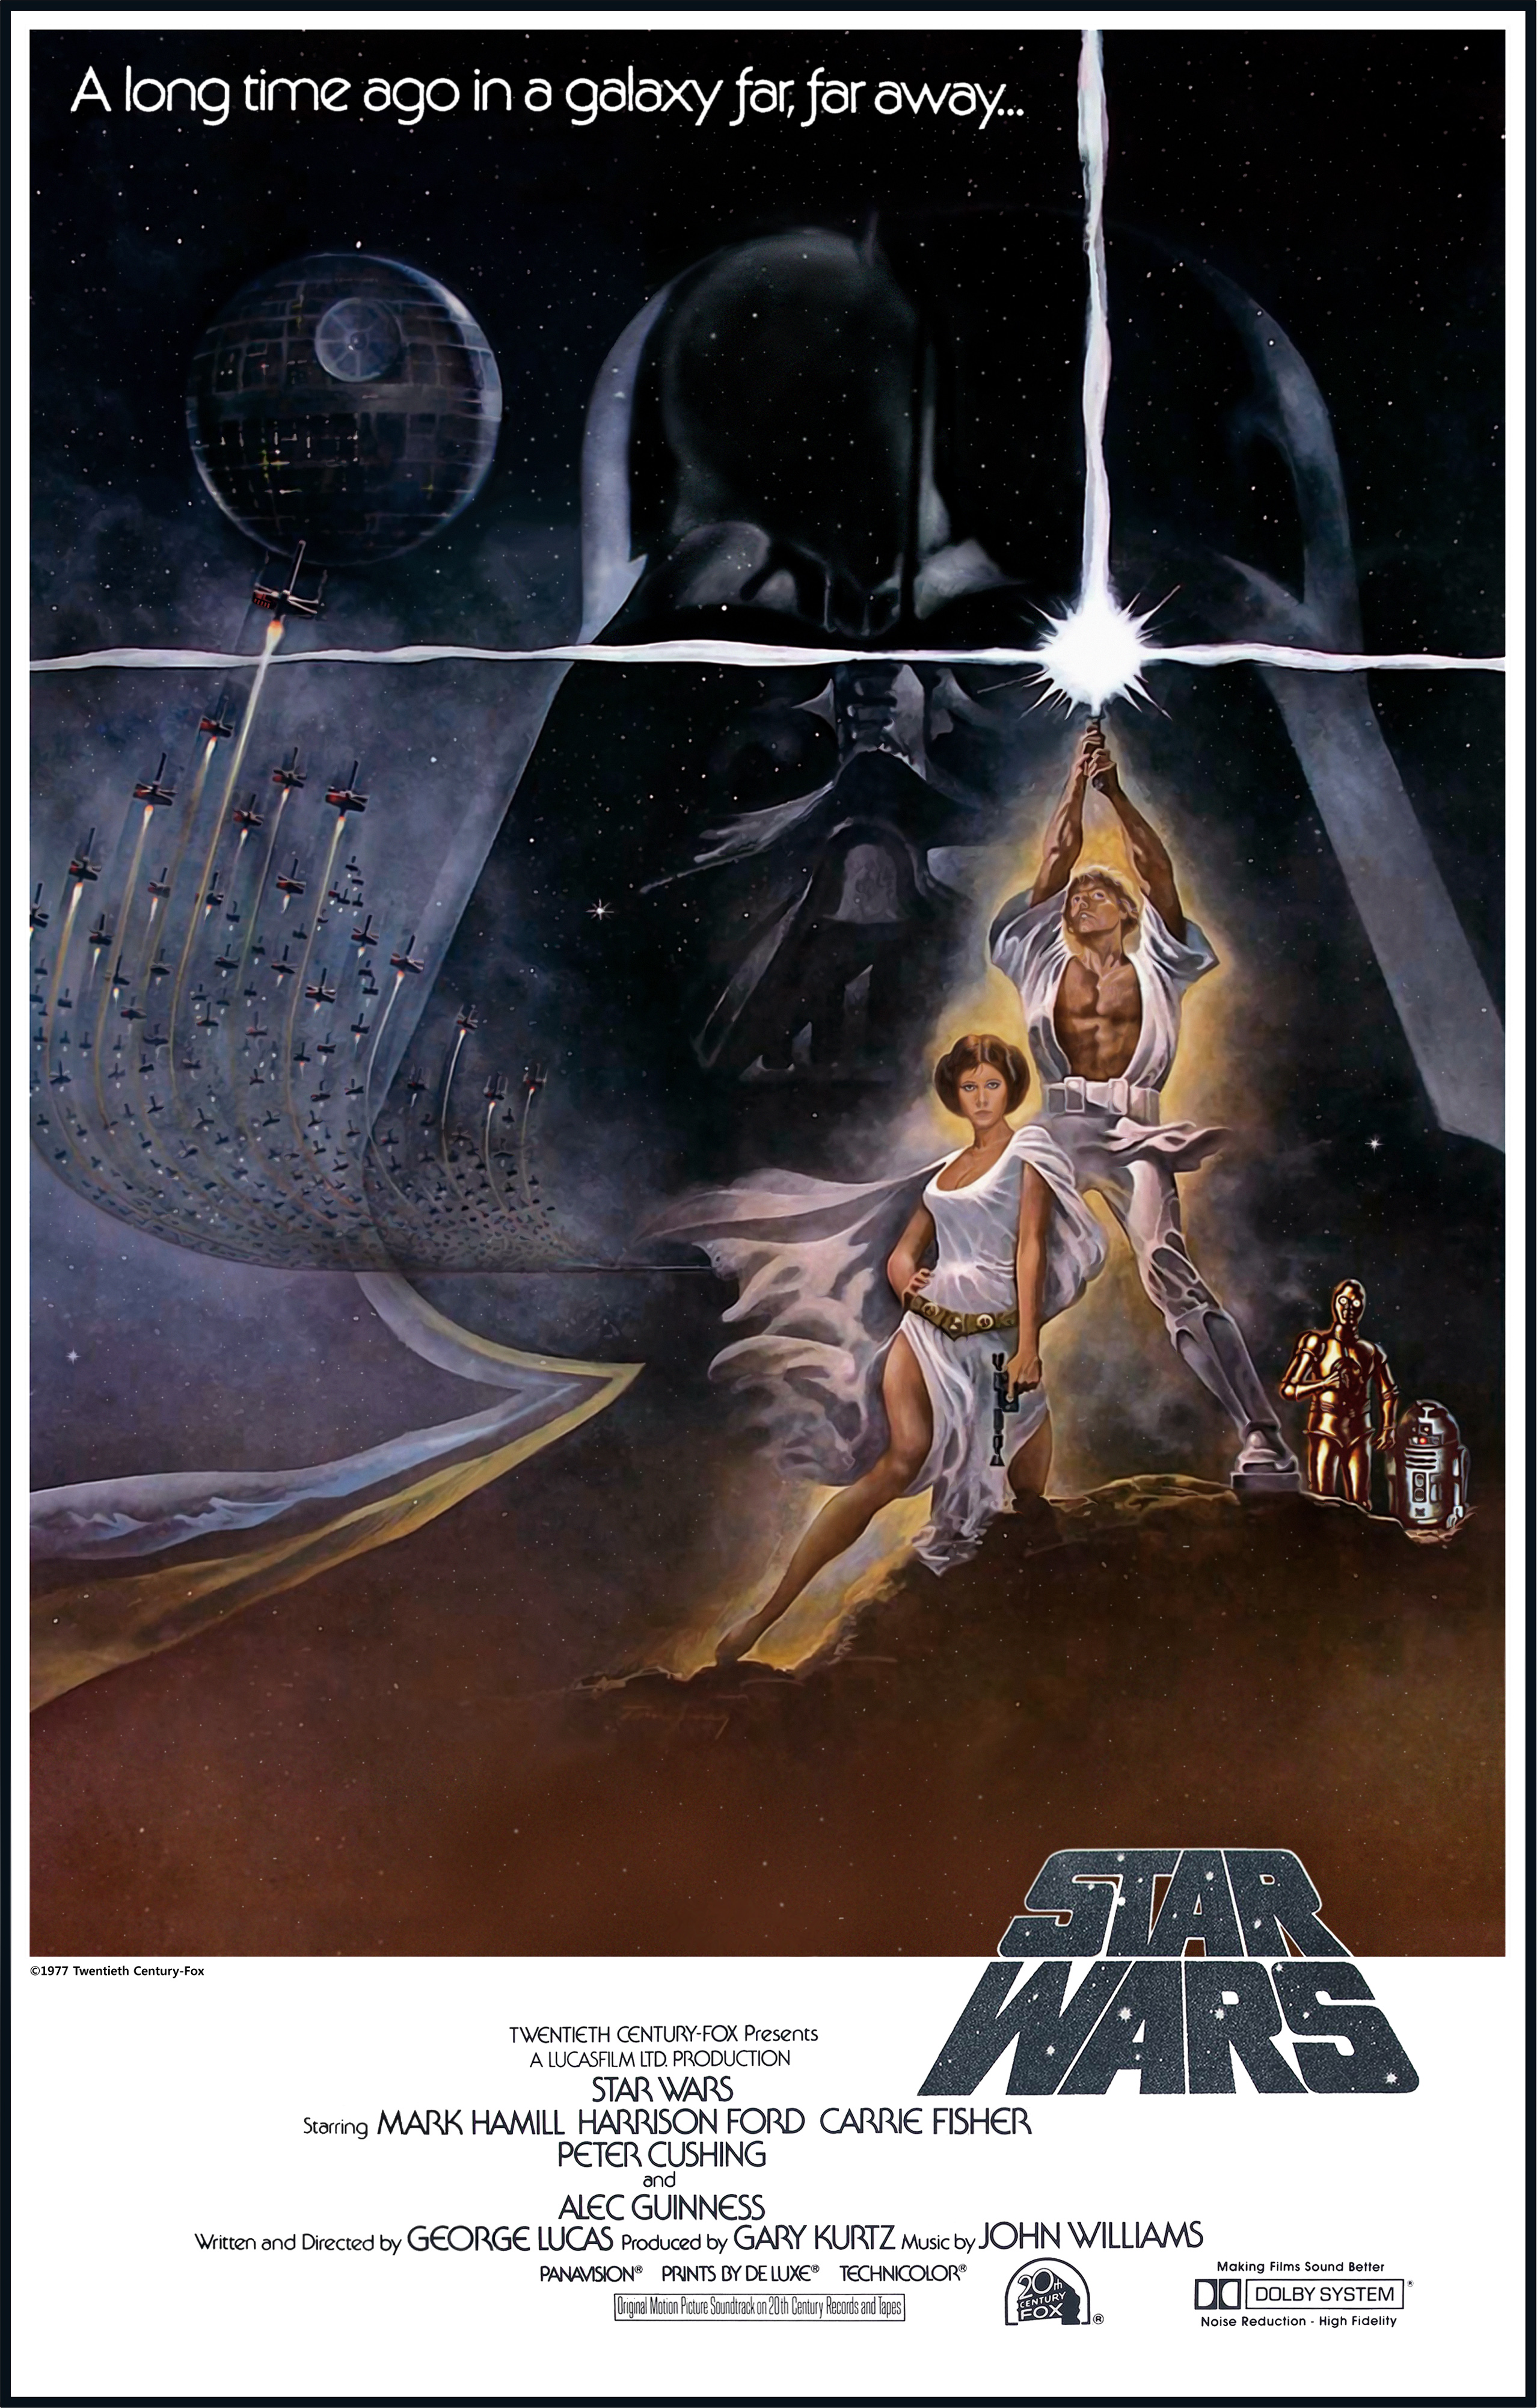 Movie Posters From Then and Now